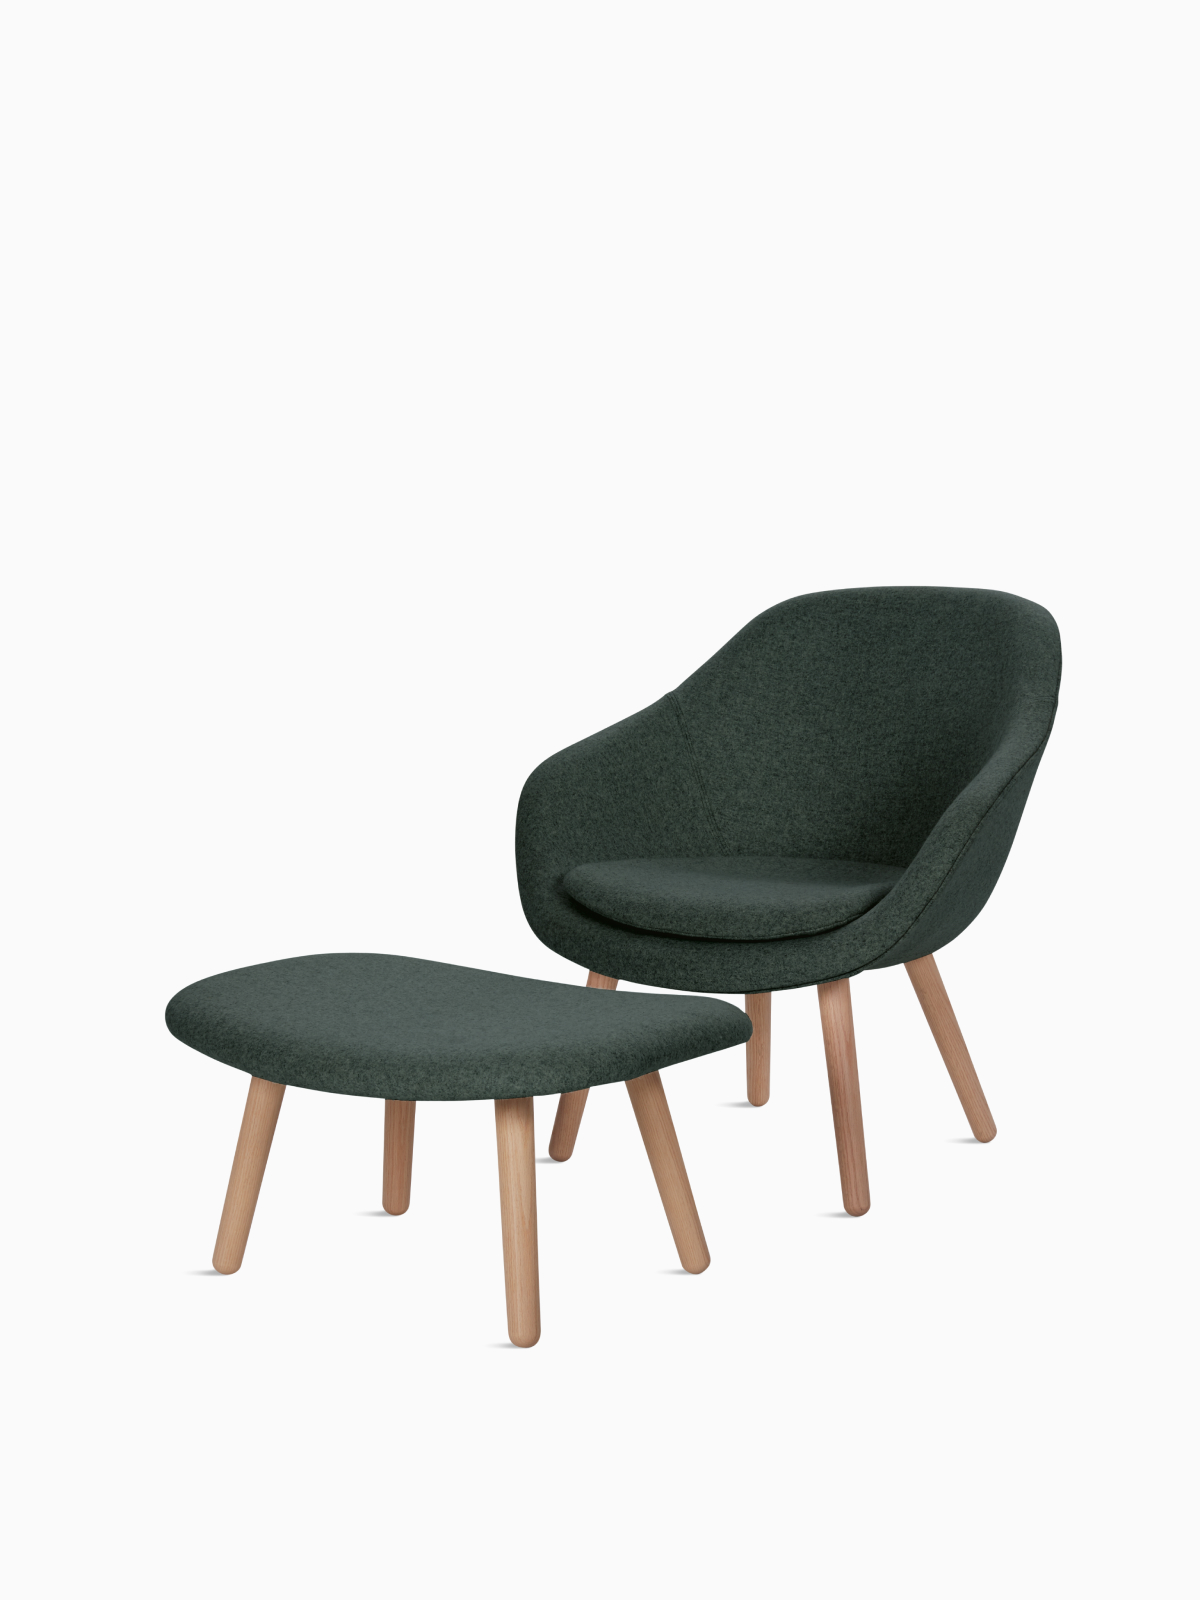 About A Lounge Chair and Ottoman